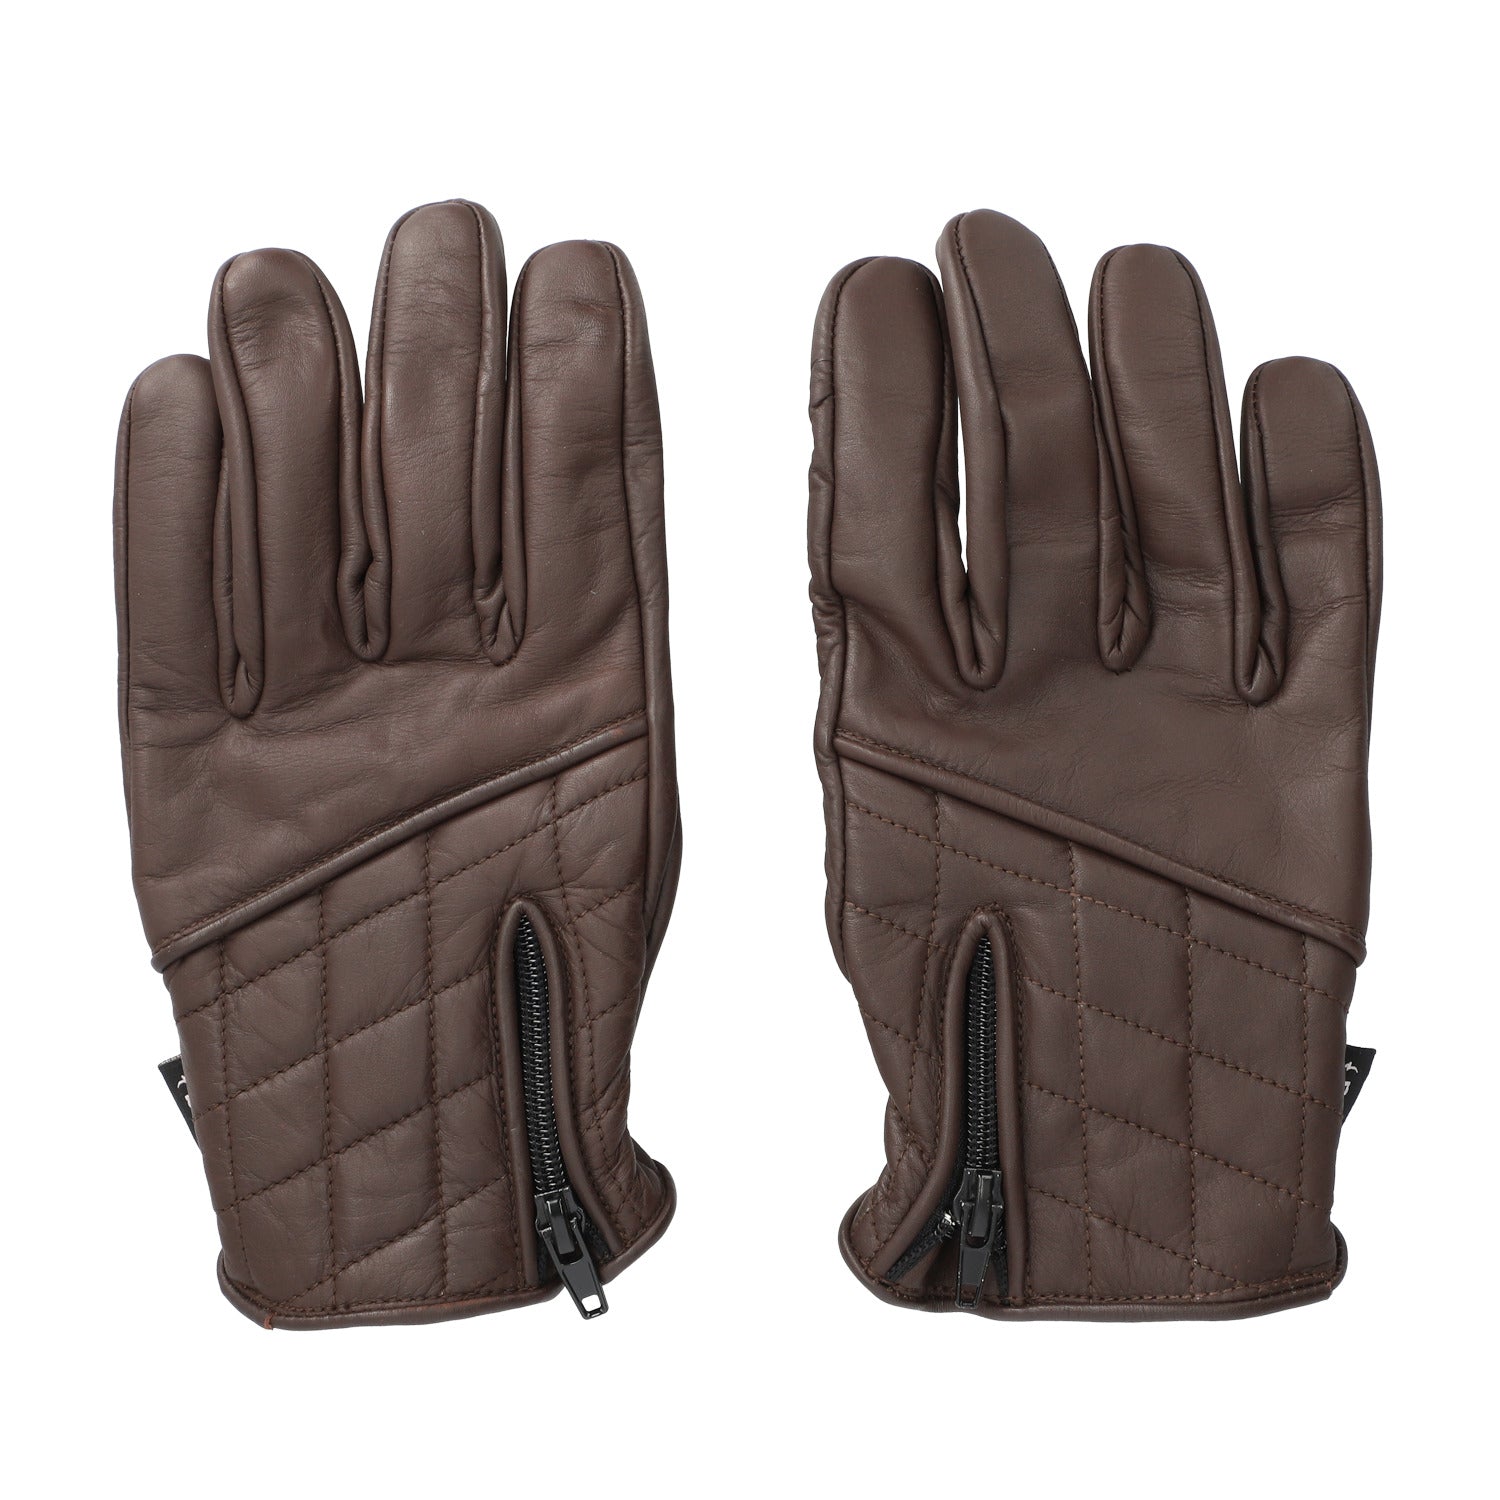 RIDEZ RR VERVE GLOVES Motorcycle Riding Gloves RR05 DBROWN